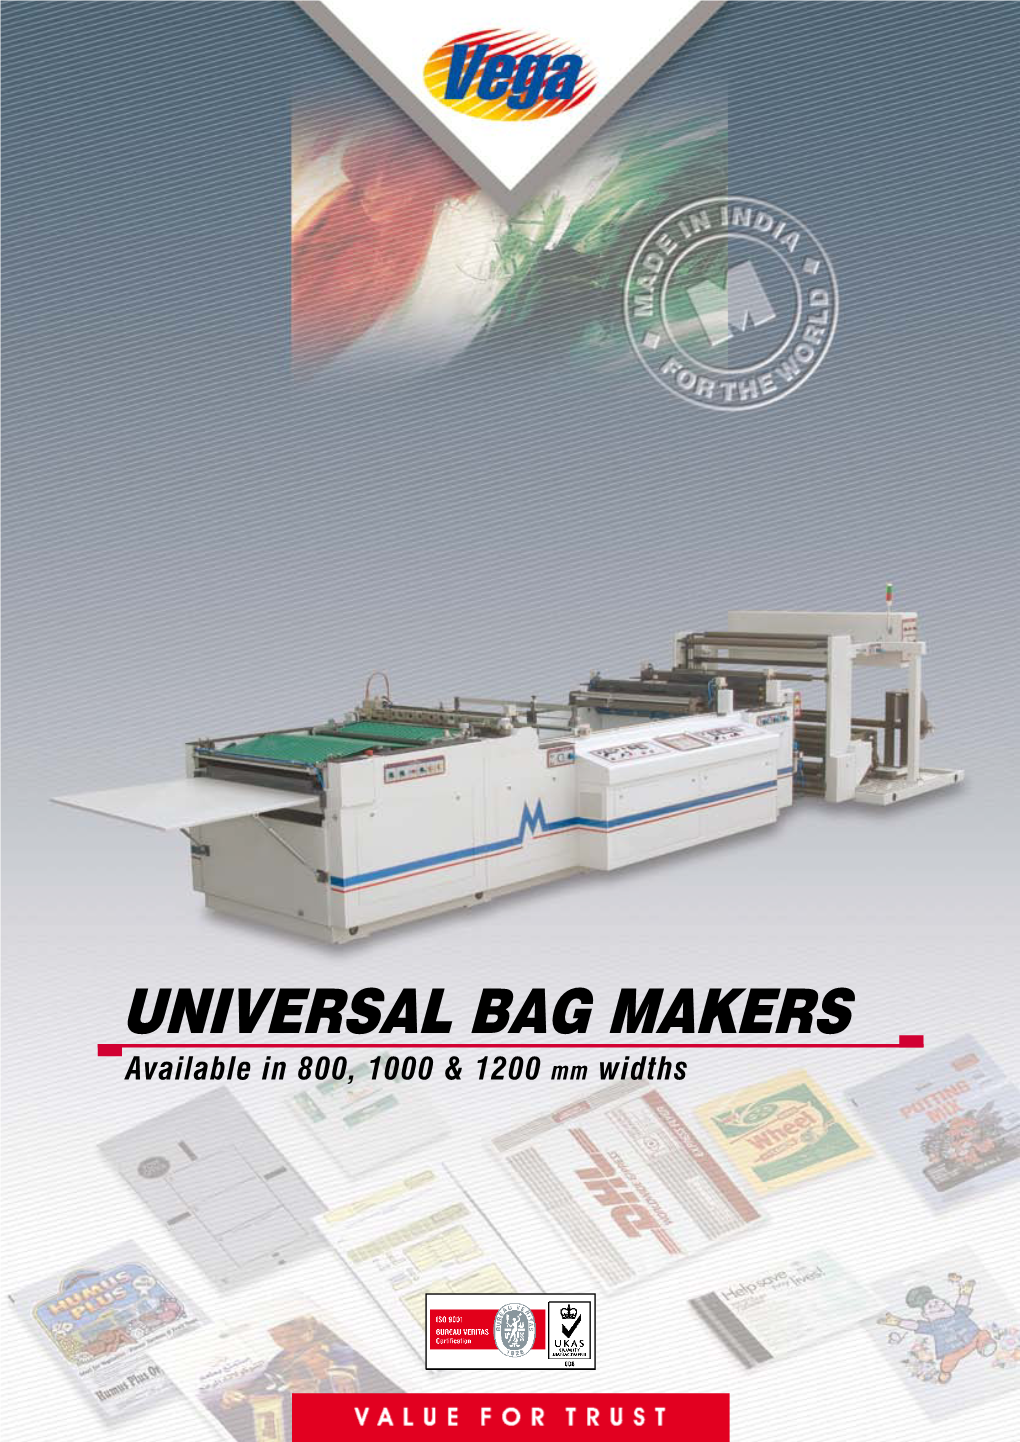 UNIVERSAL BAG MAKERS Available in 800, 1000 & 1200 Mm Widths UNIVERSAL BAG MAKERS